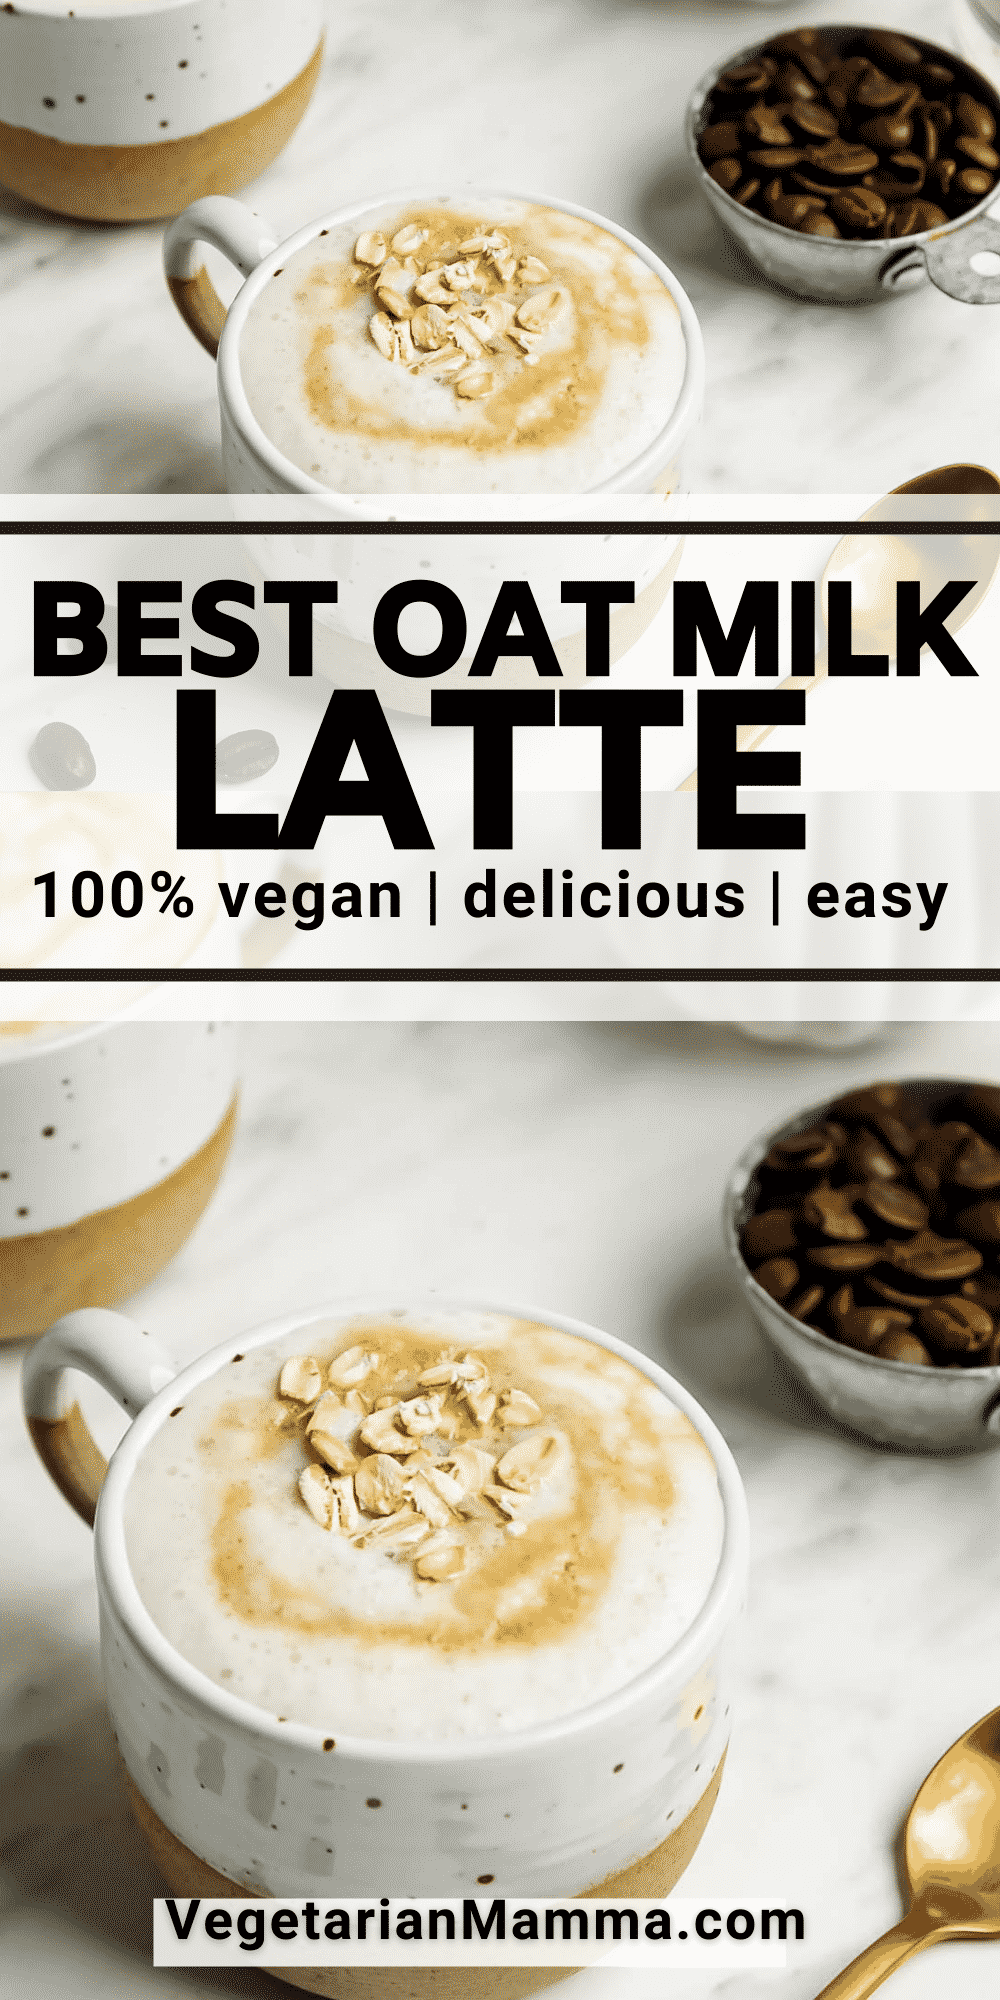 Oat Milk Latte is a delicious, easy to make morning drink that will make you feel like you are drinking a fancy coffeeshop beverage